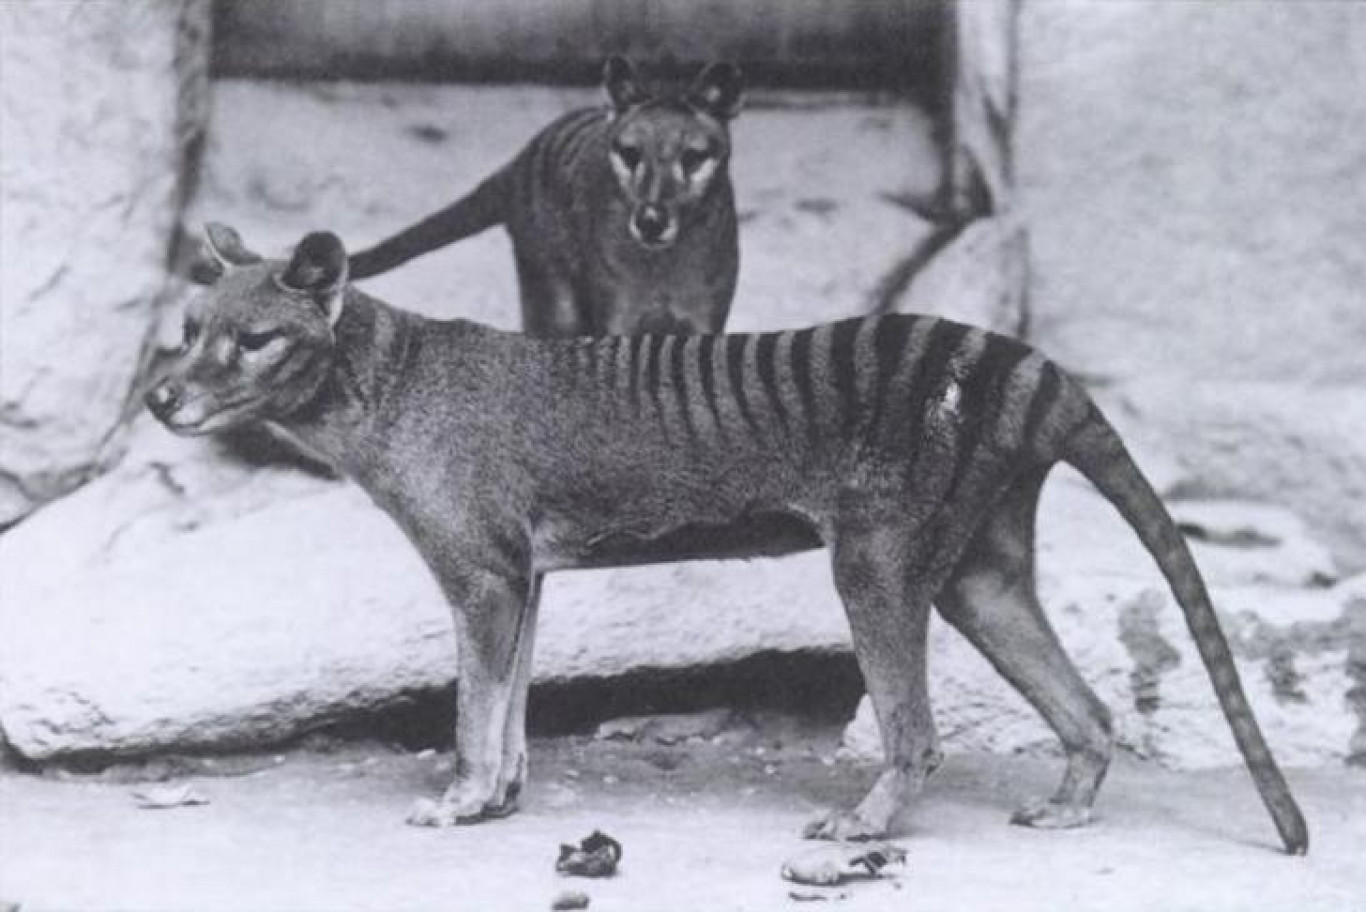 The remains of the last known Tasmanian tiger were found in a closet after 85 years